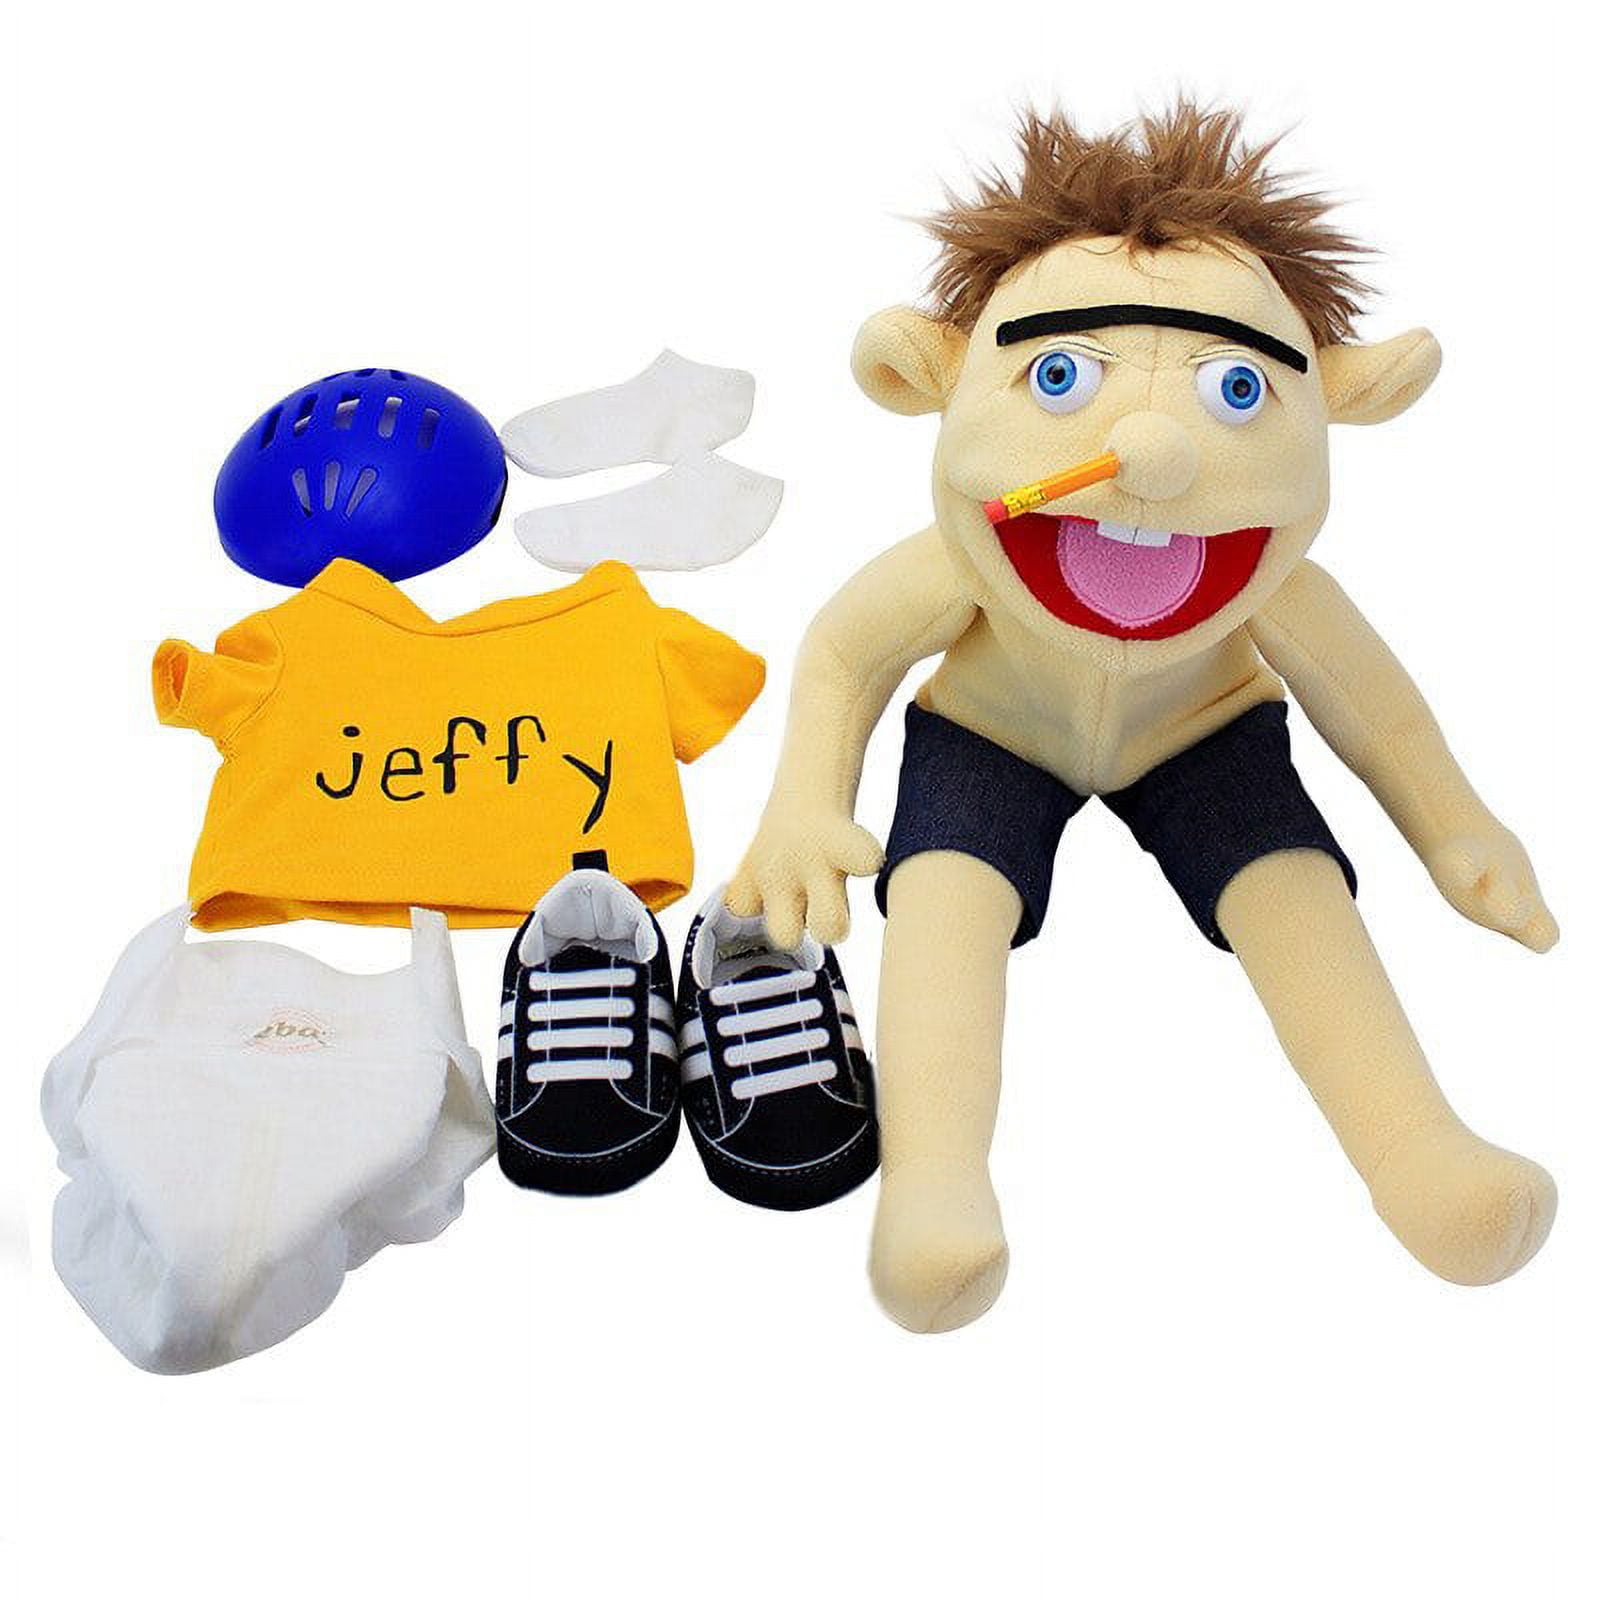 Jeffy Puppet Family Plush Toy, Silly Ventriloquist Hand Puppets Kids Party  Gift